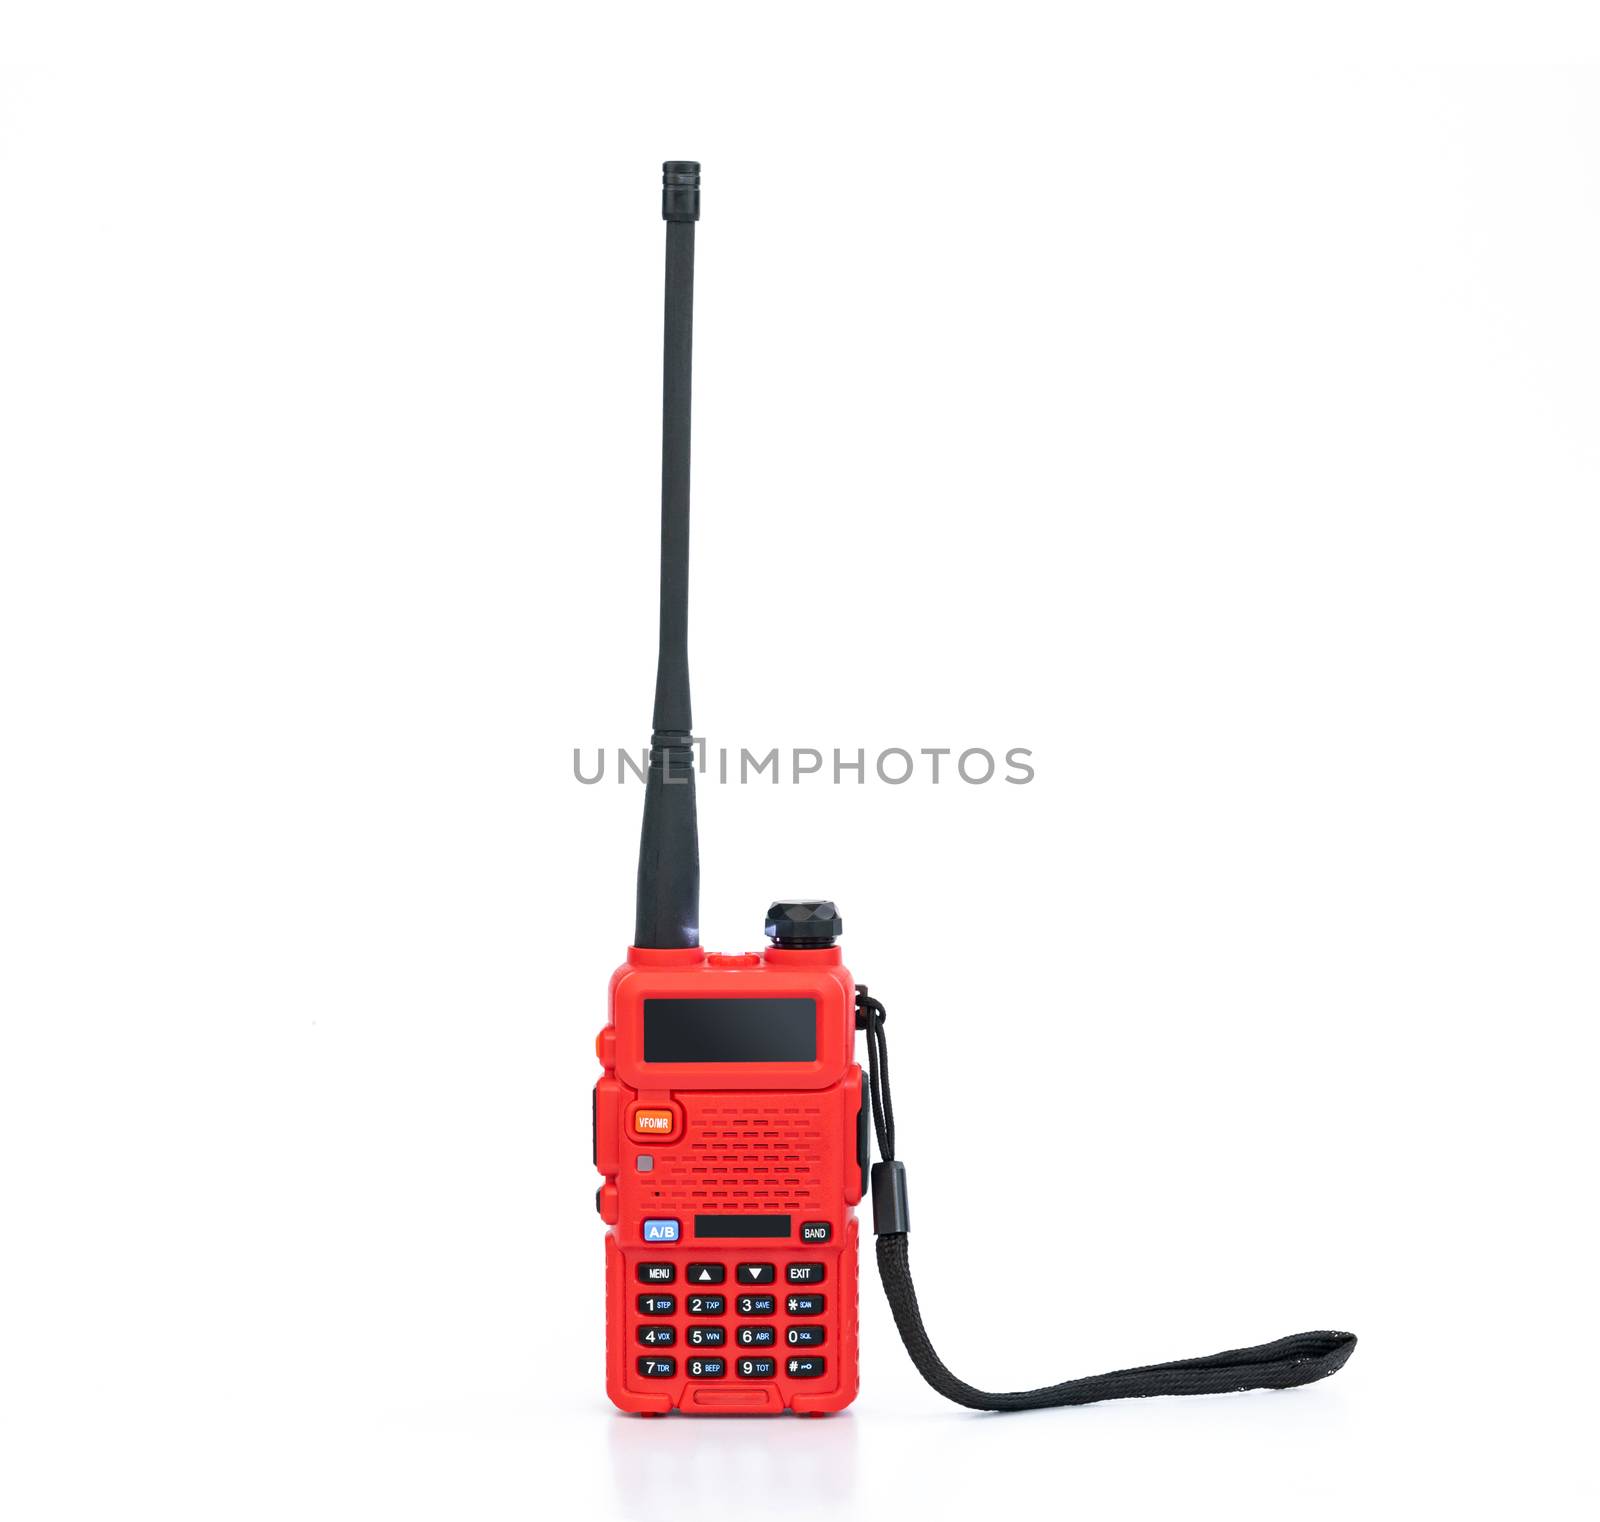 Radio communication for general use in various industries such as Security, construction and remote communications isolated on white background.